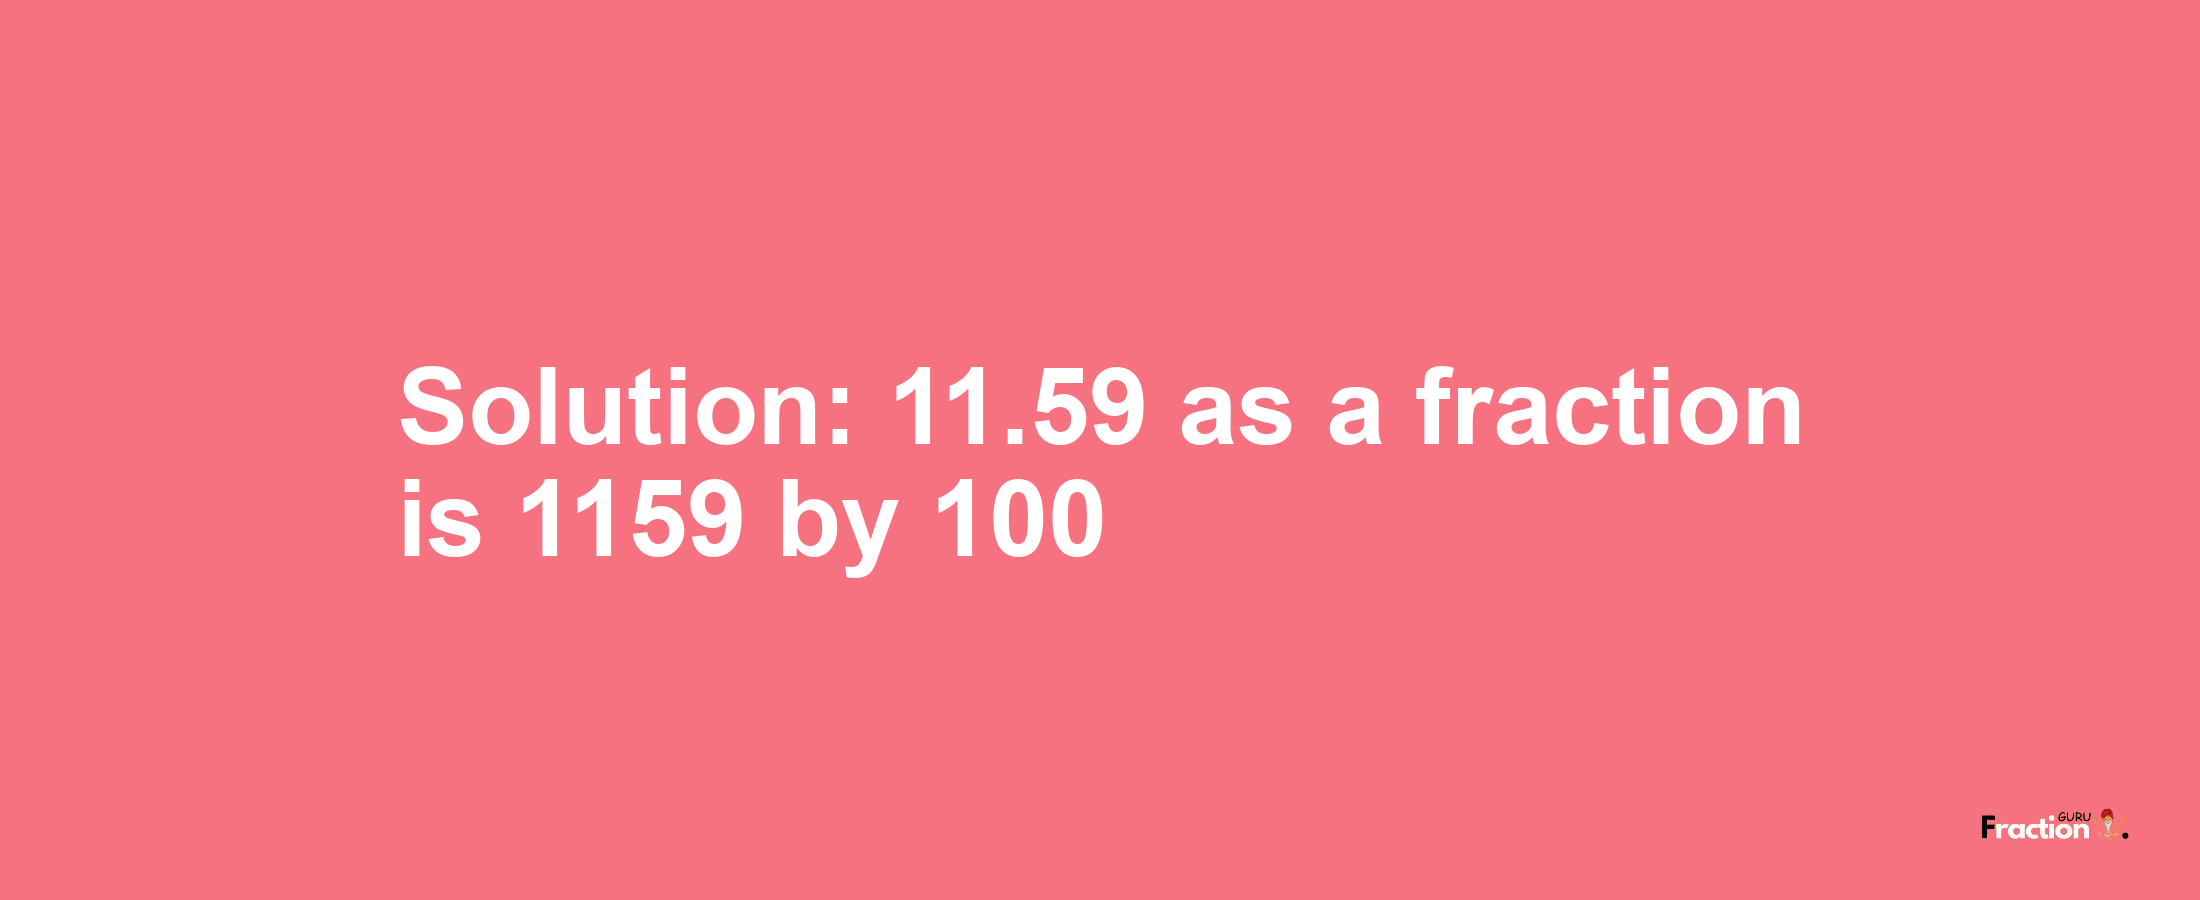 Solution:11.59 as a fraction is 1159/100